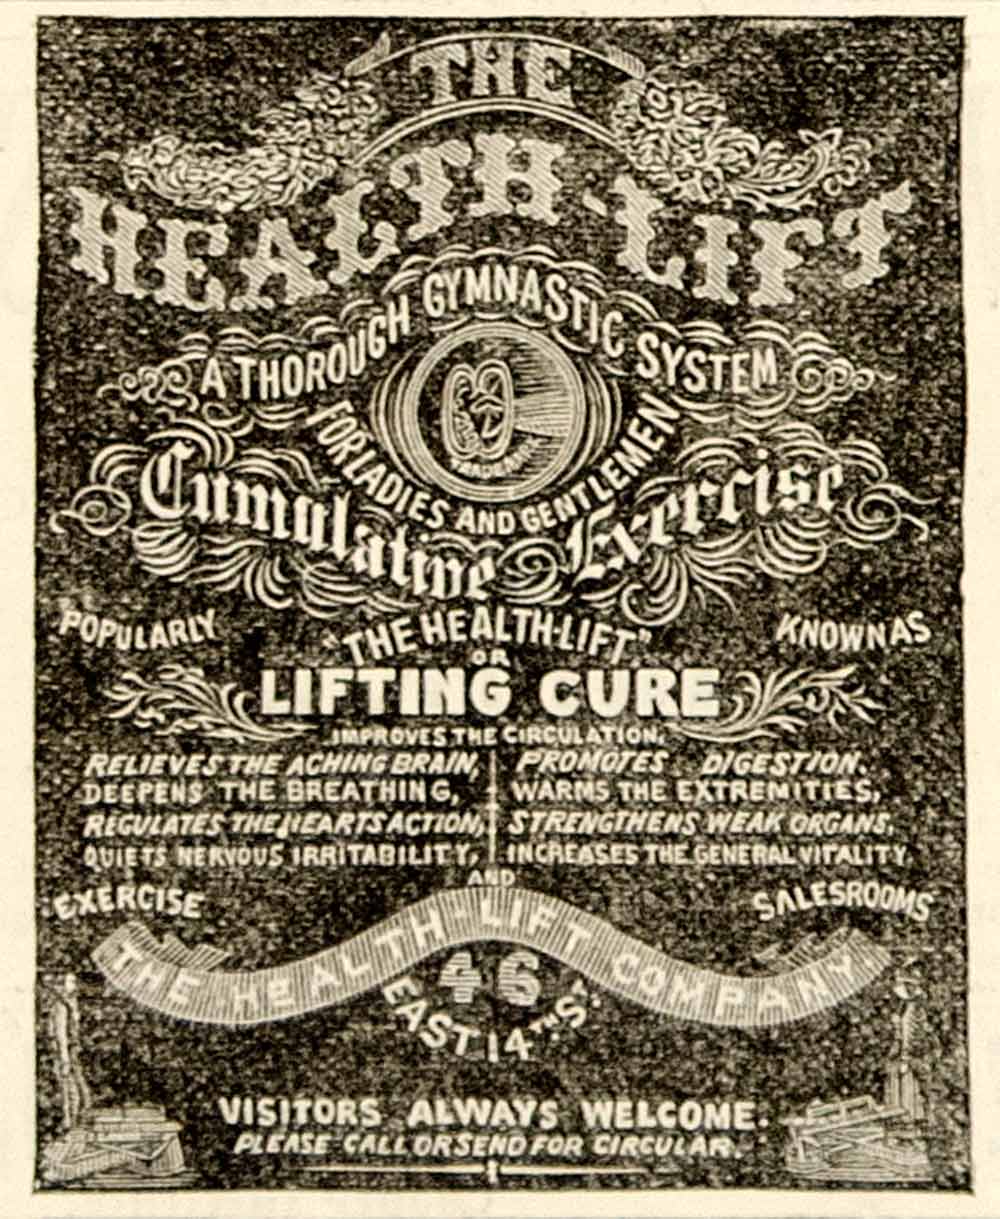 1876 Ad Antique Health Lift Physical Fitness Machine Weightlifting Exercise Cure